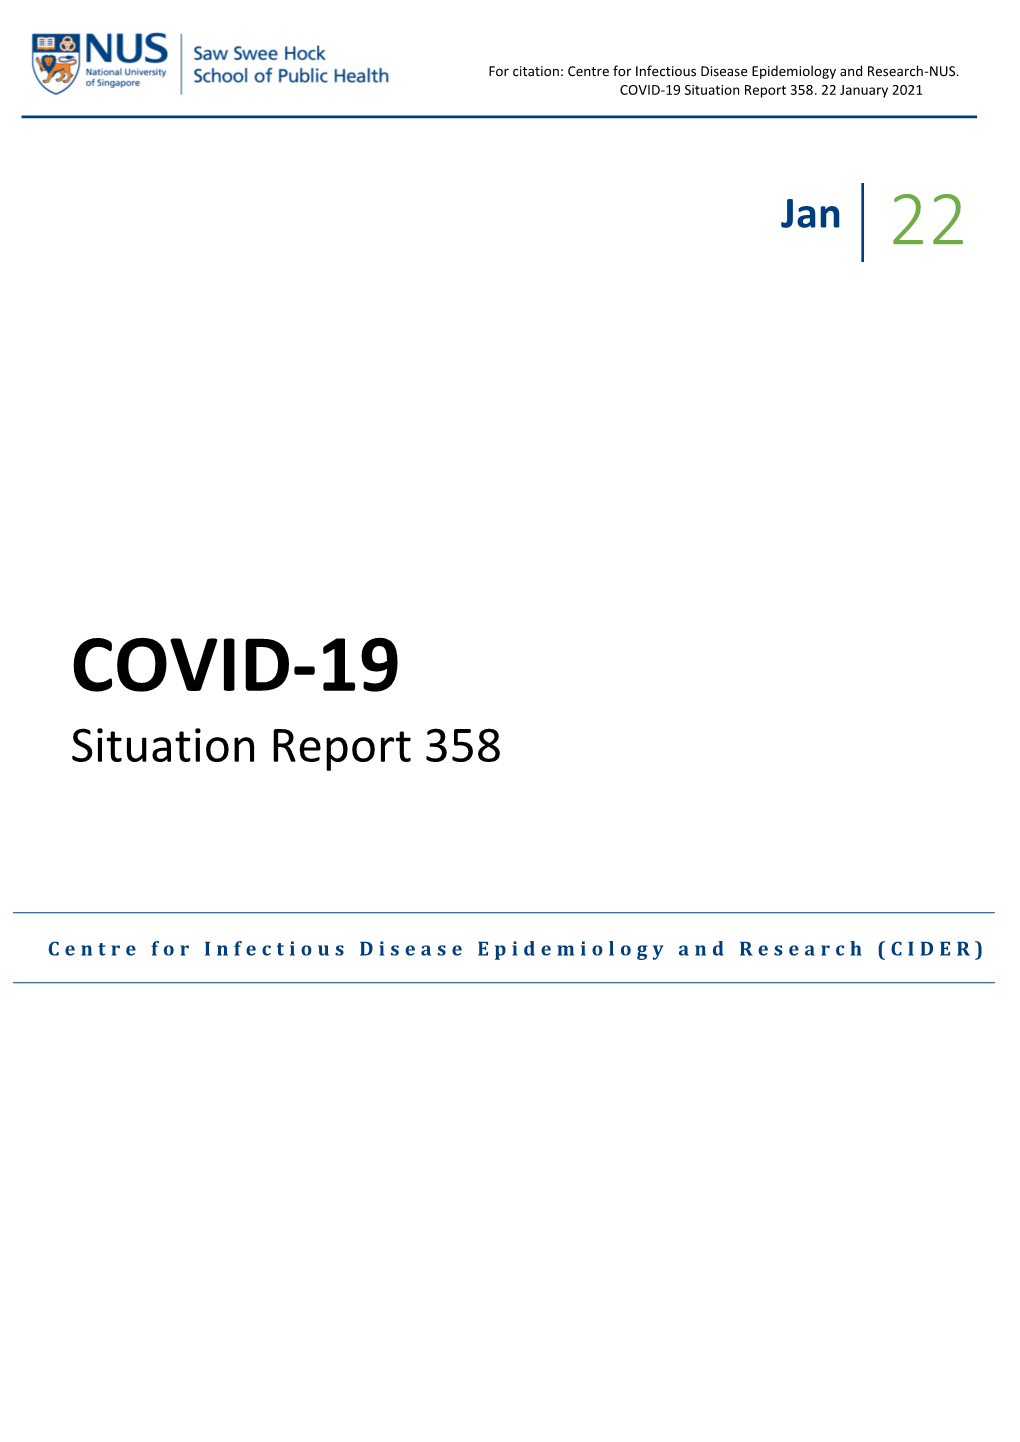 COVID-19 Situation Report 358